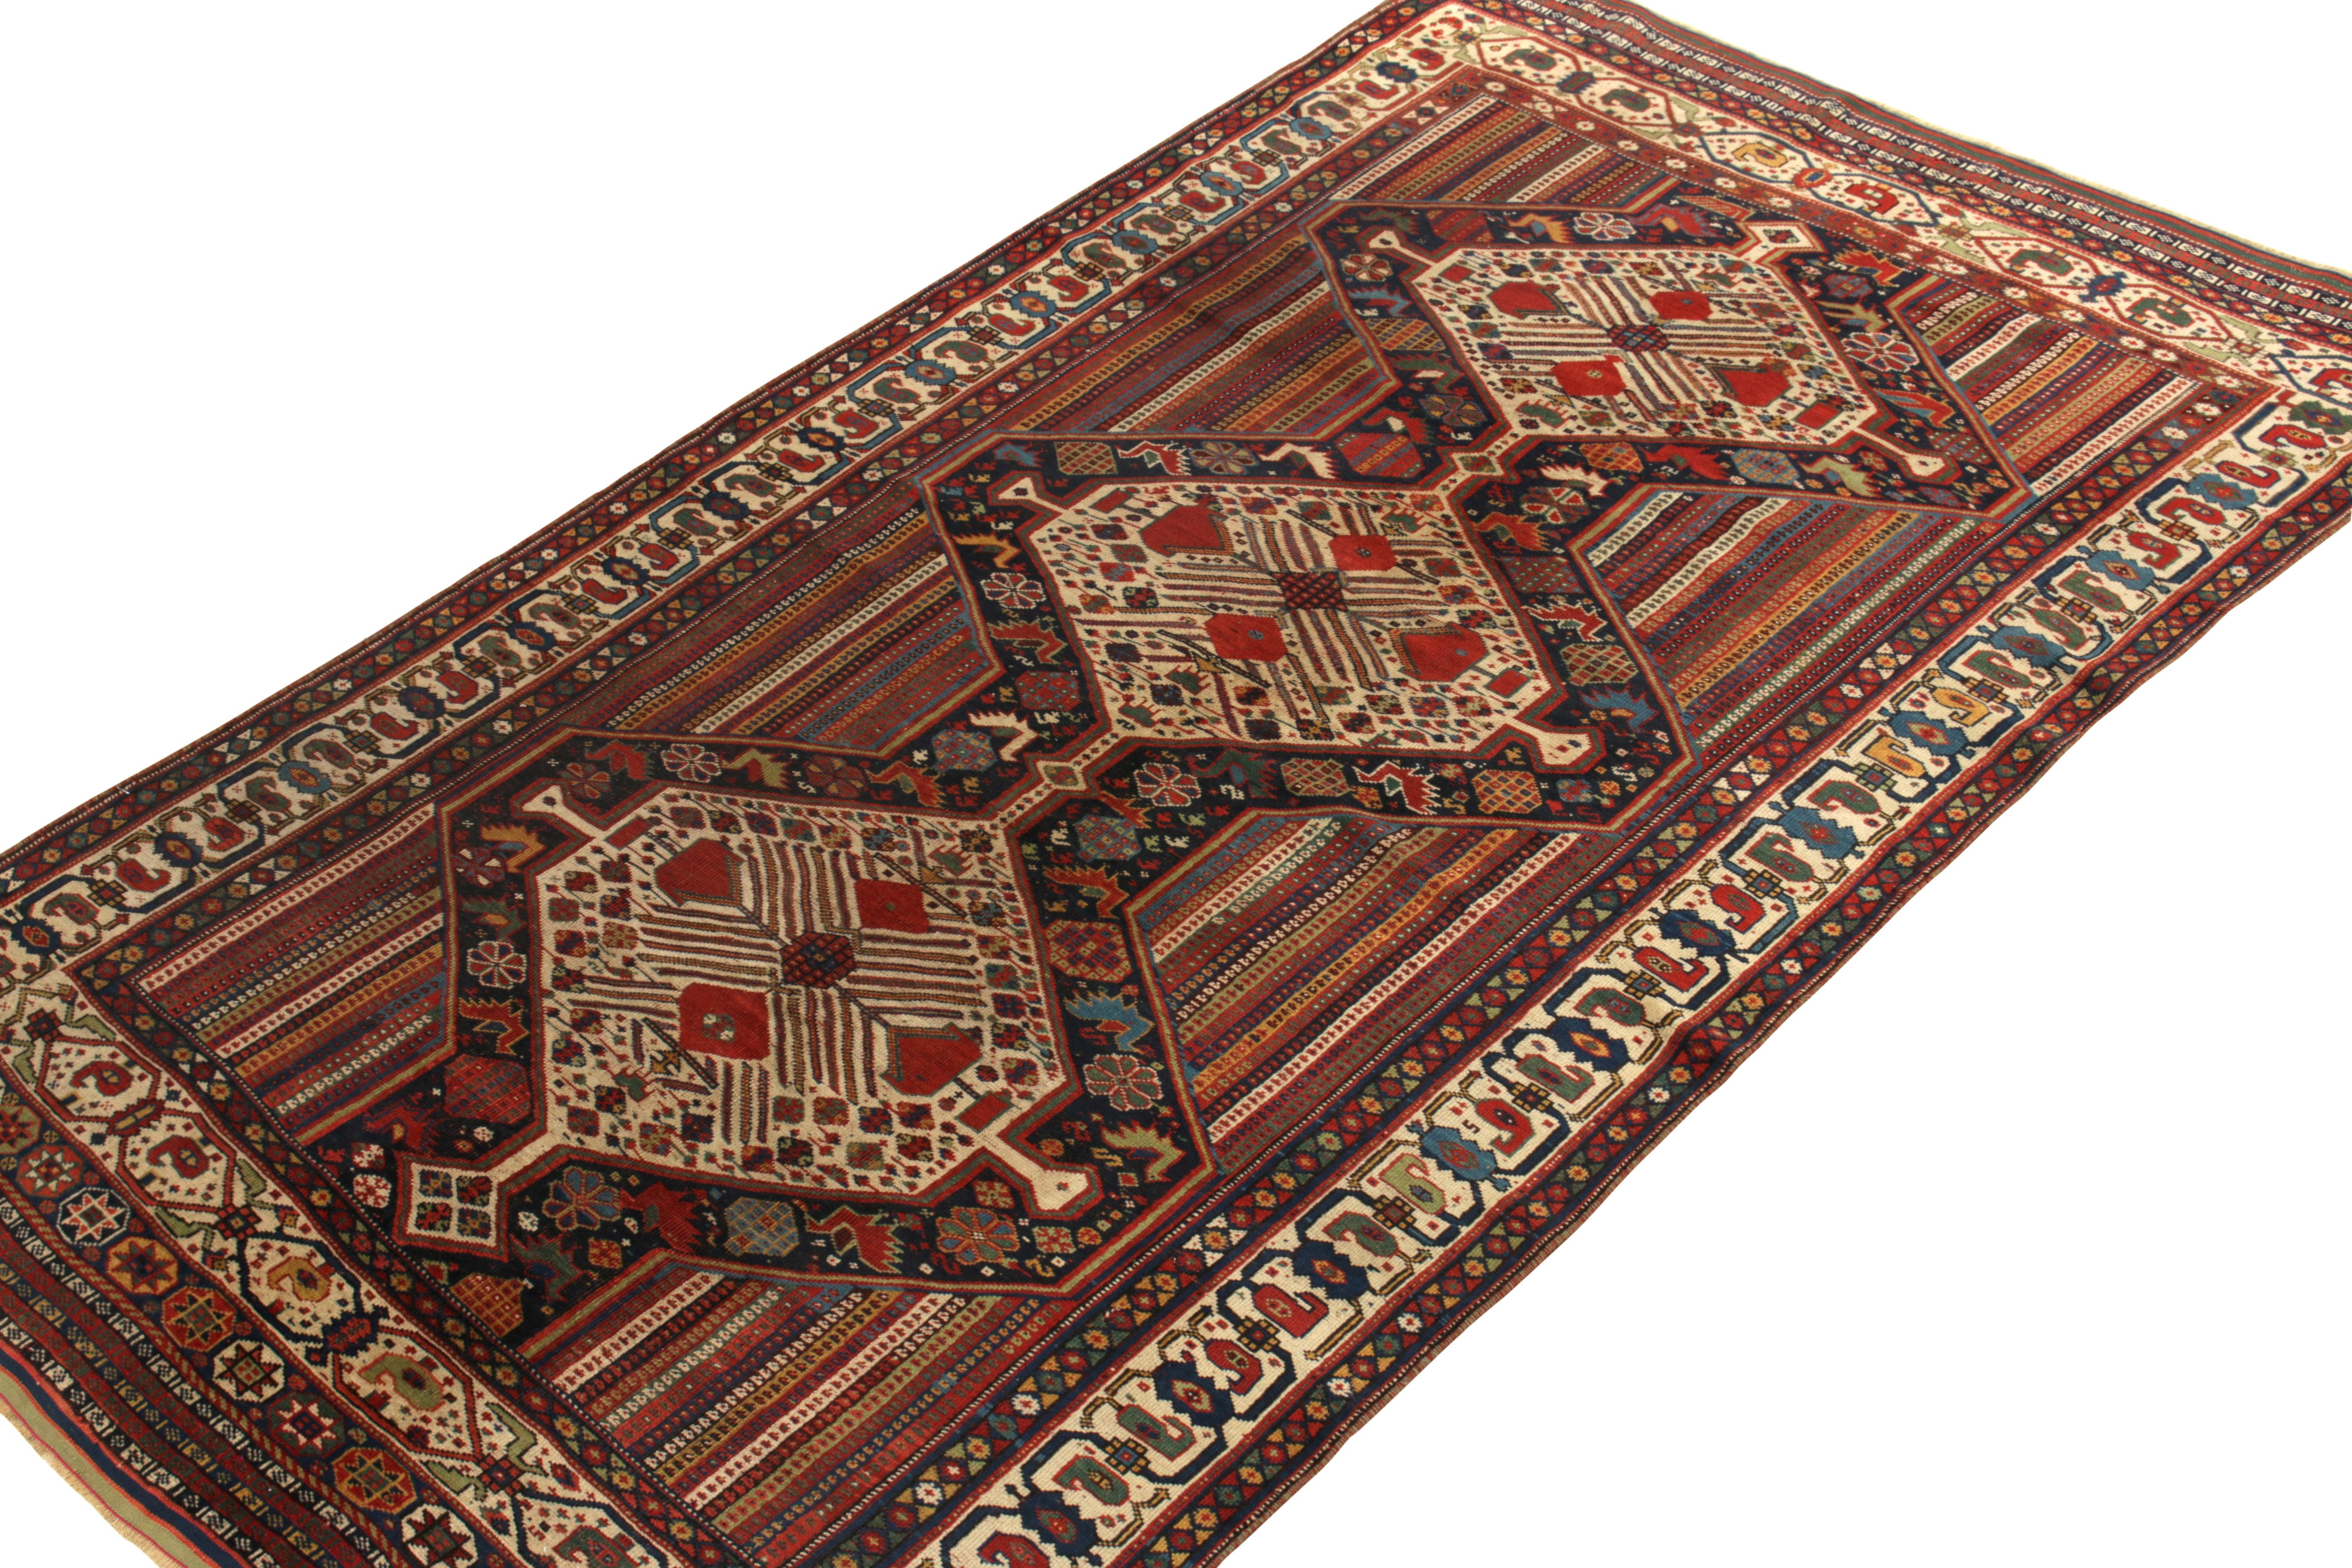 Tribal Antique Persian Qashqai Rug in Red, Beige-Brown Medallion Pattern by Rug & Kilim For Sale